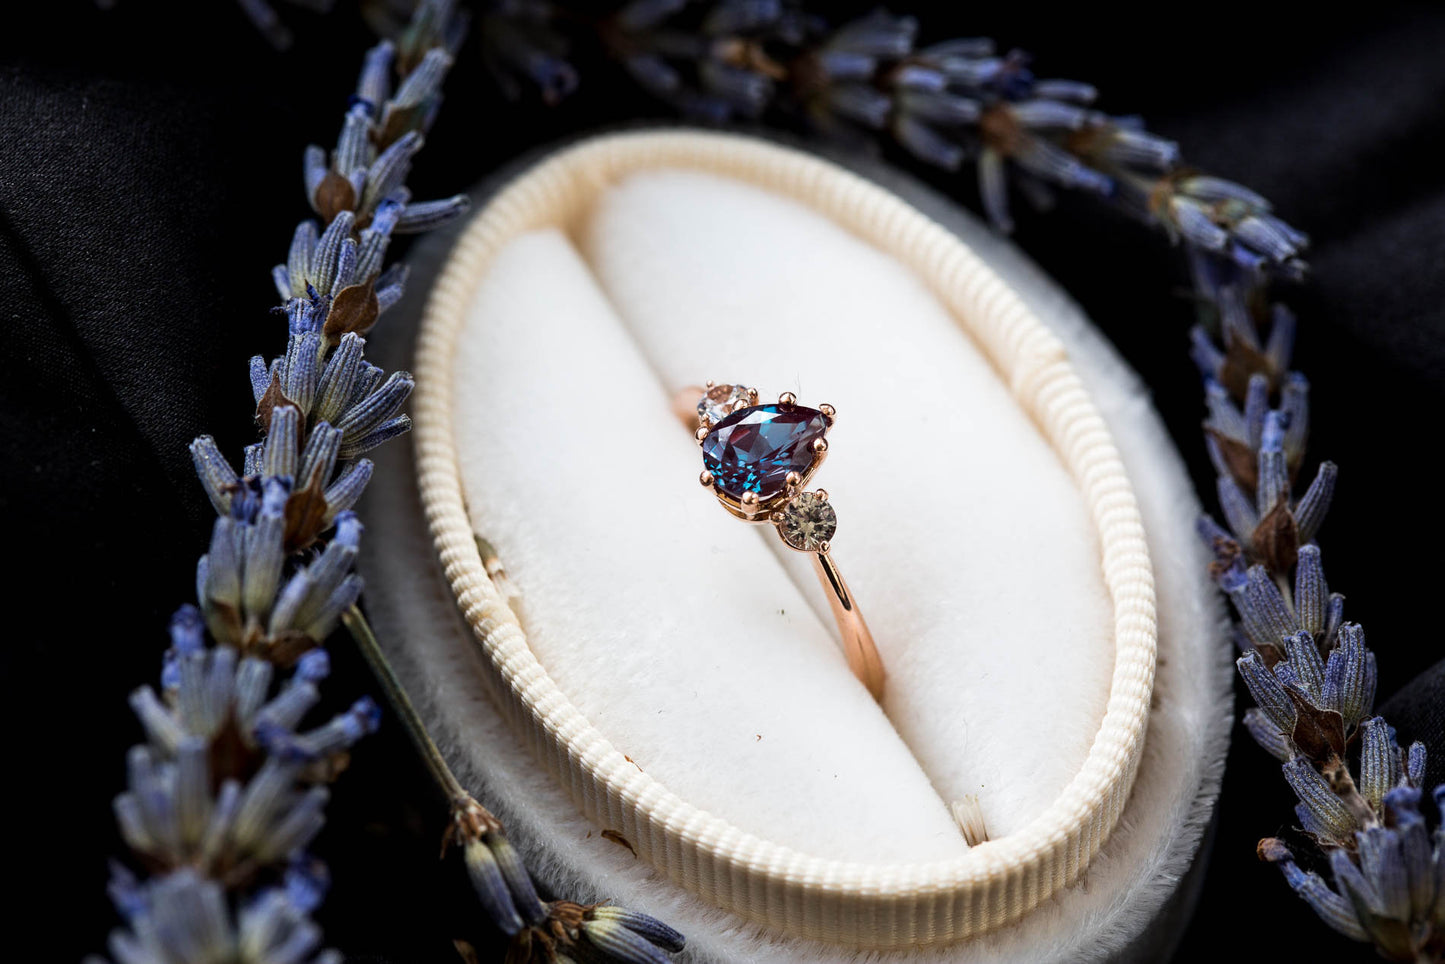 Load image into Gallery viewer, Pear alexandrite and sapphire three stone engagement ring
